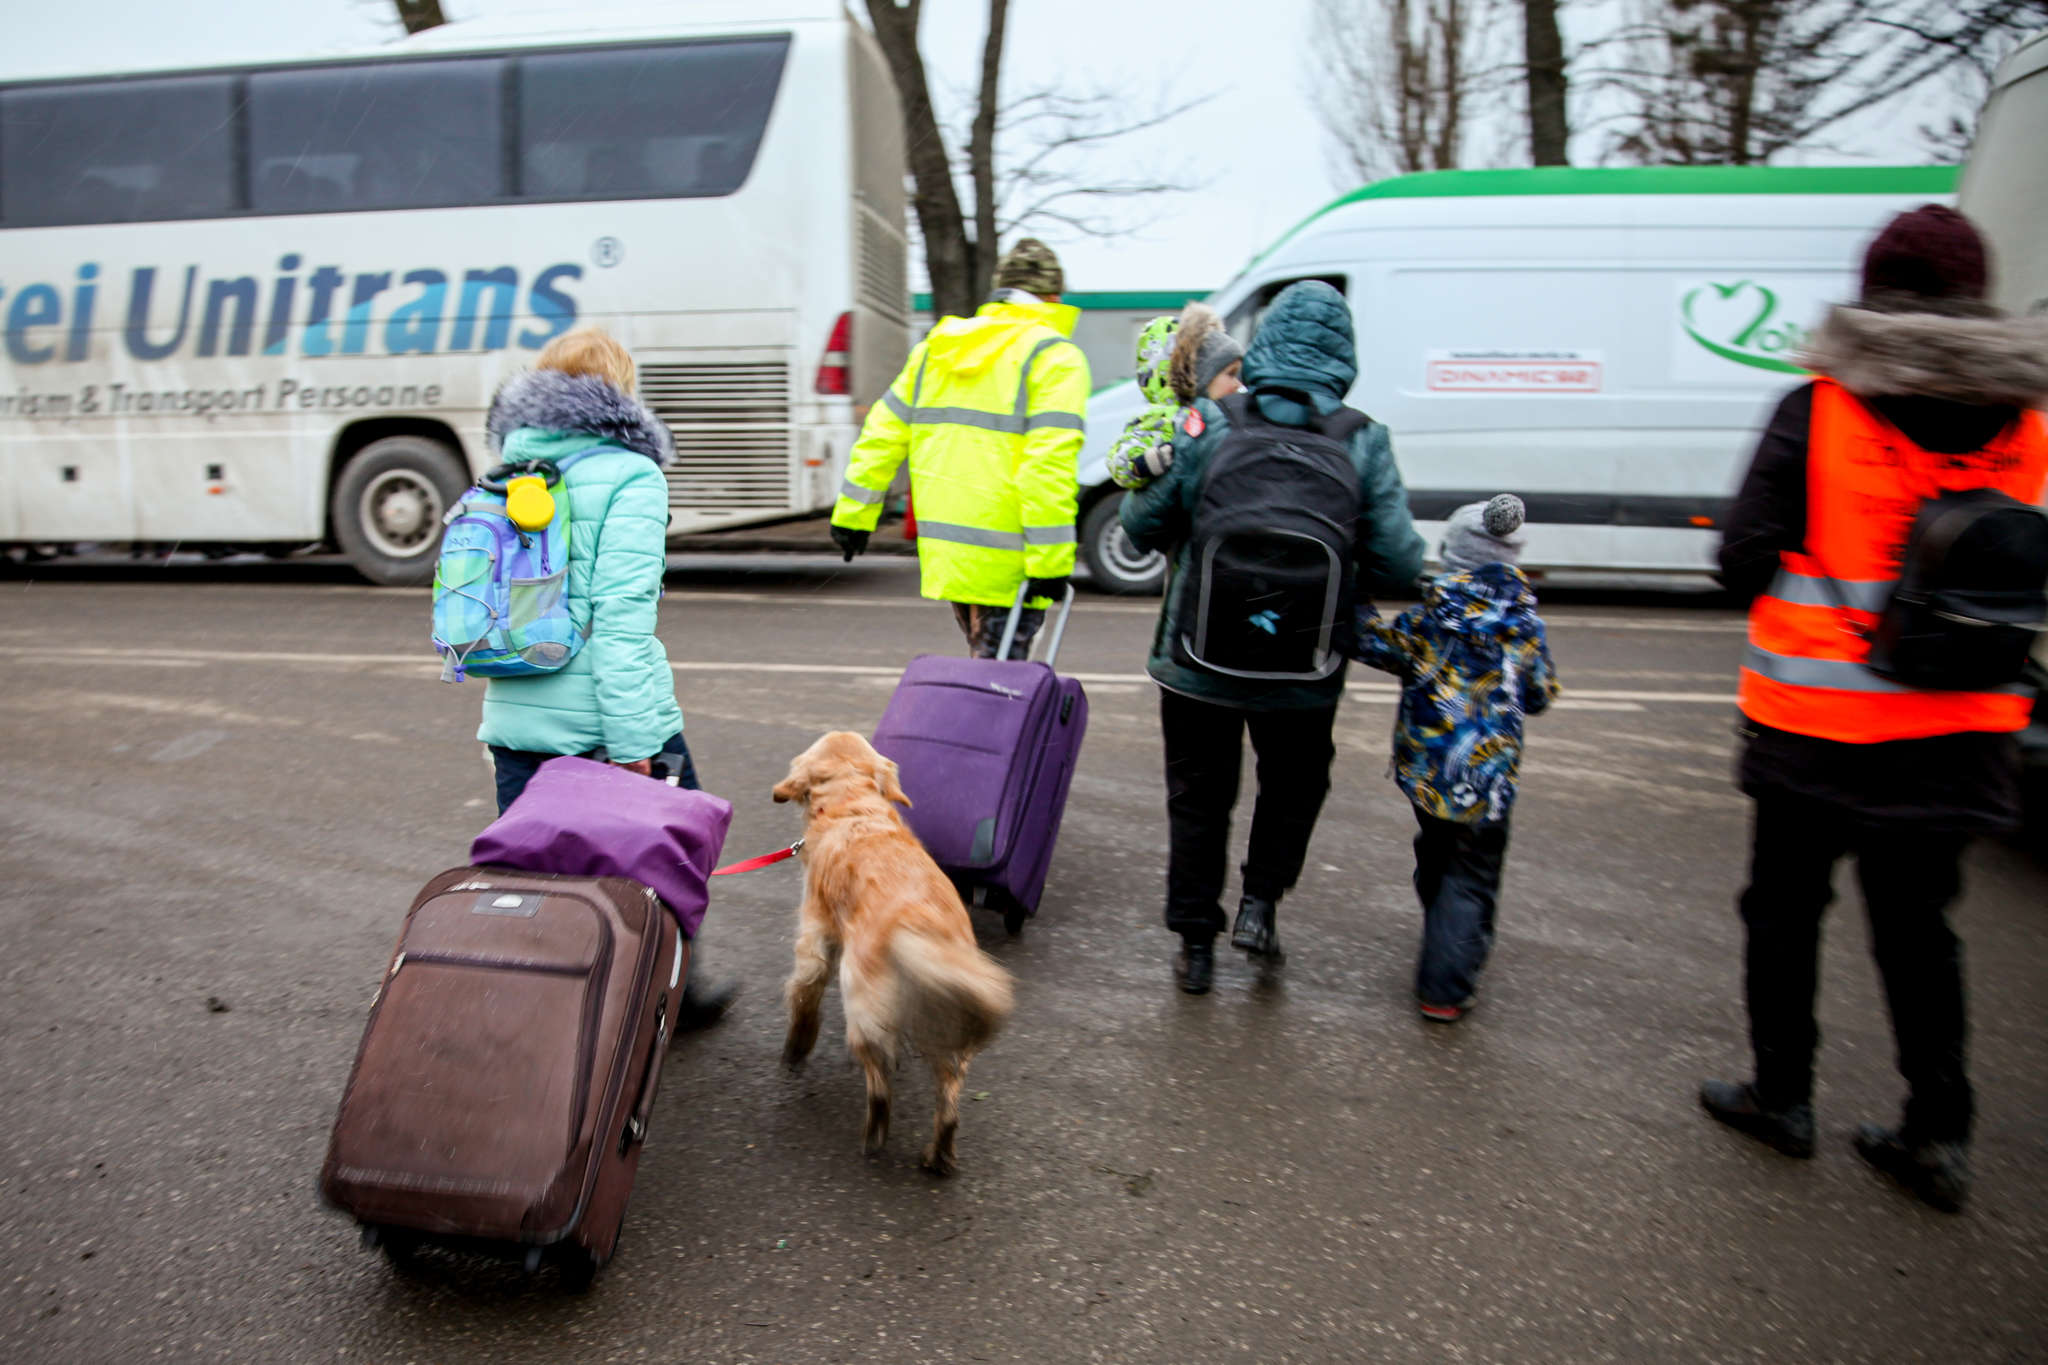 Emergency aid workers escorting women, children, and a dog to vehicles.